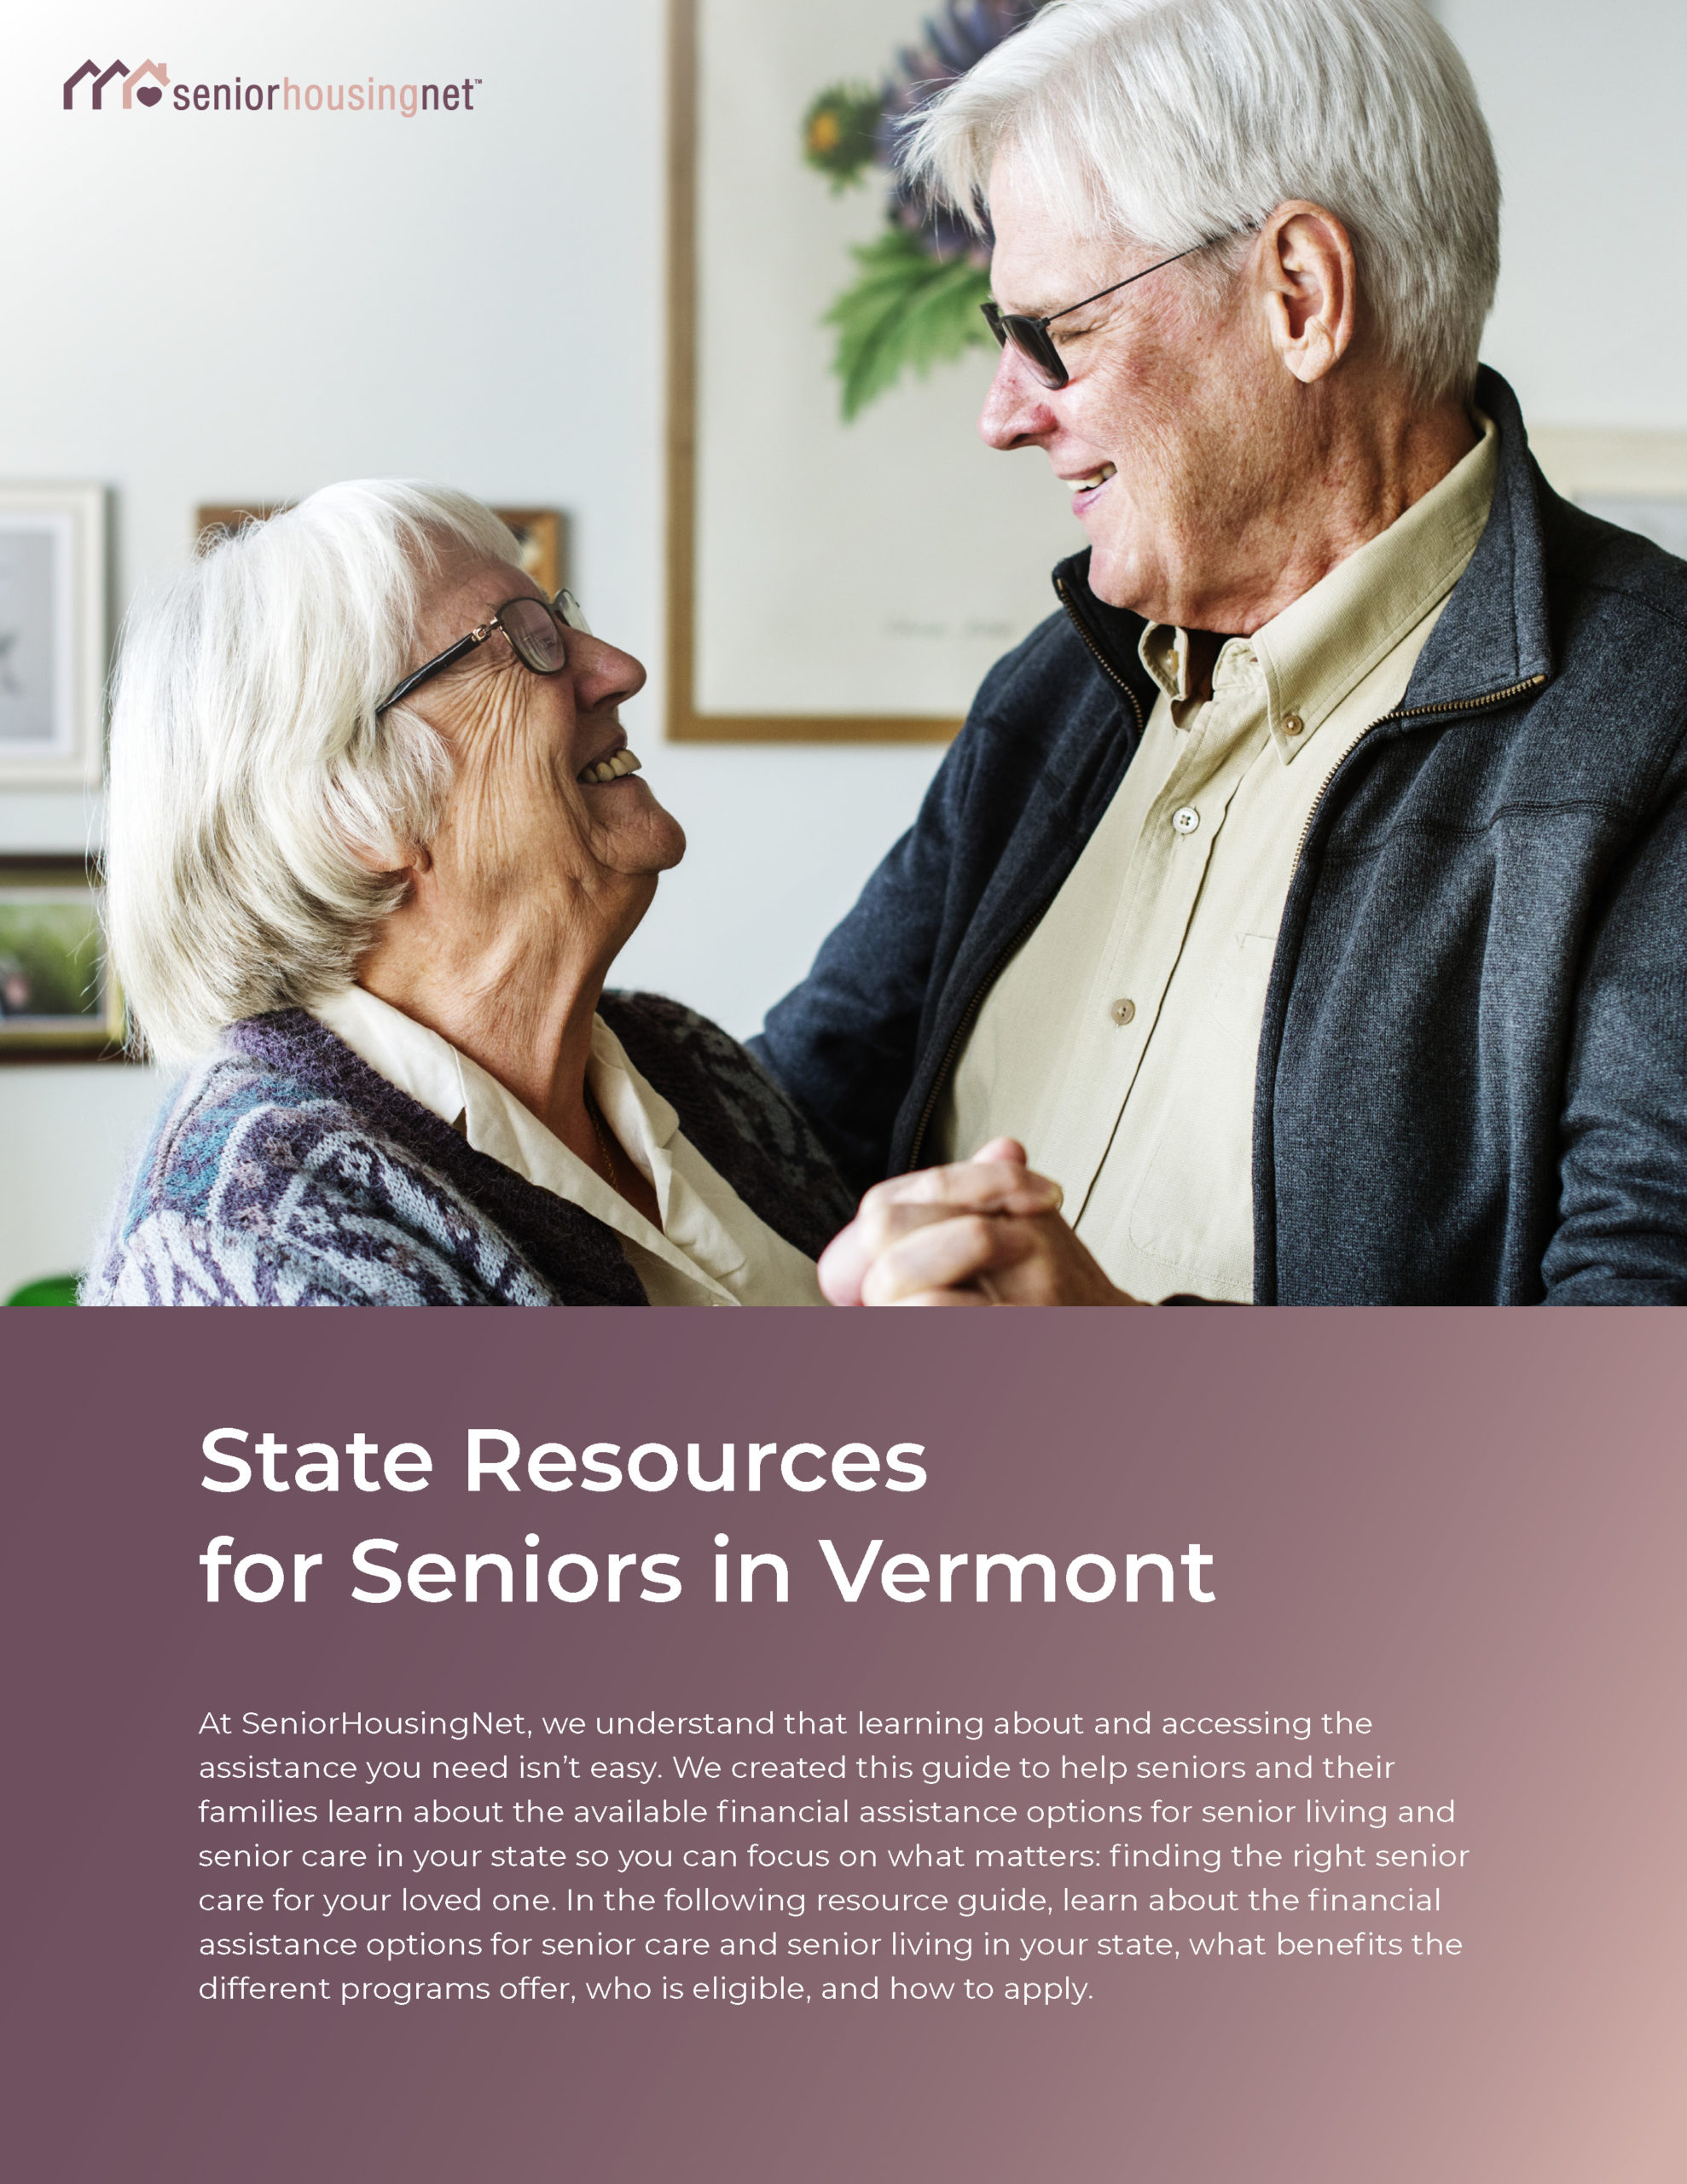 State Resources for Seniors in Vermont